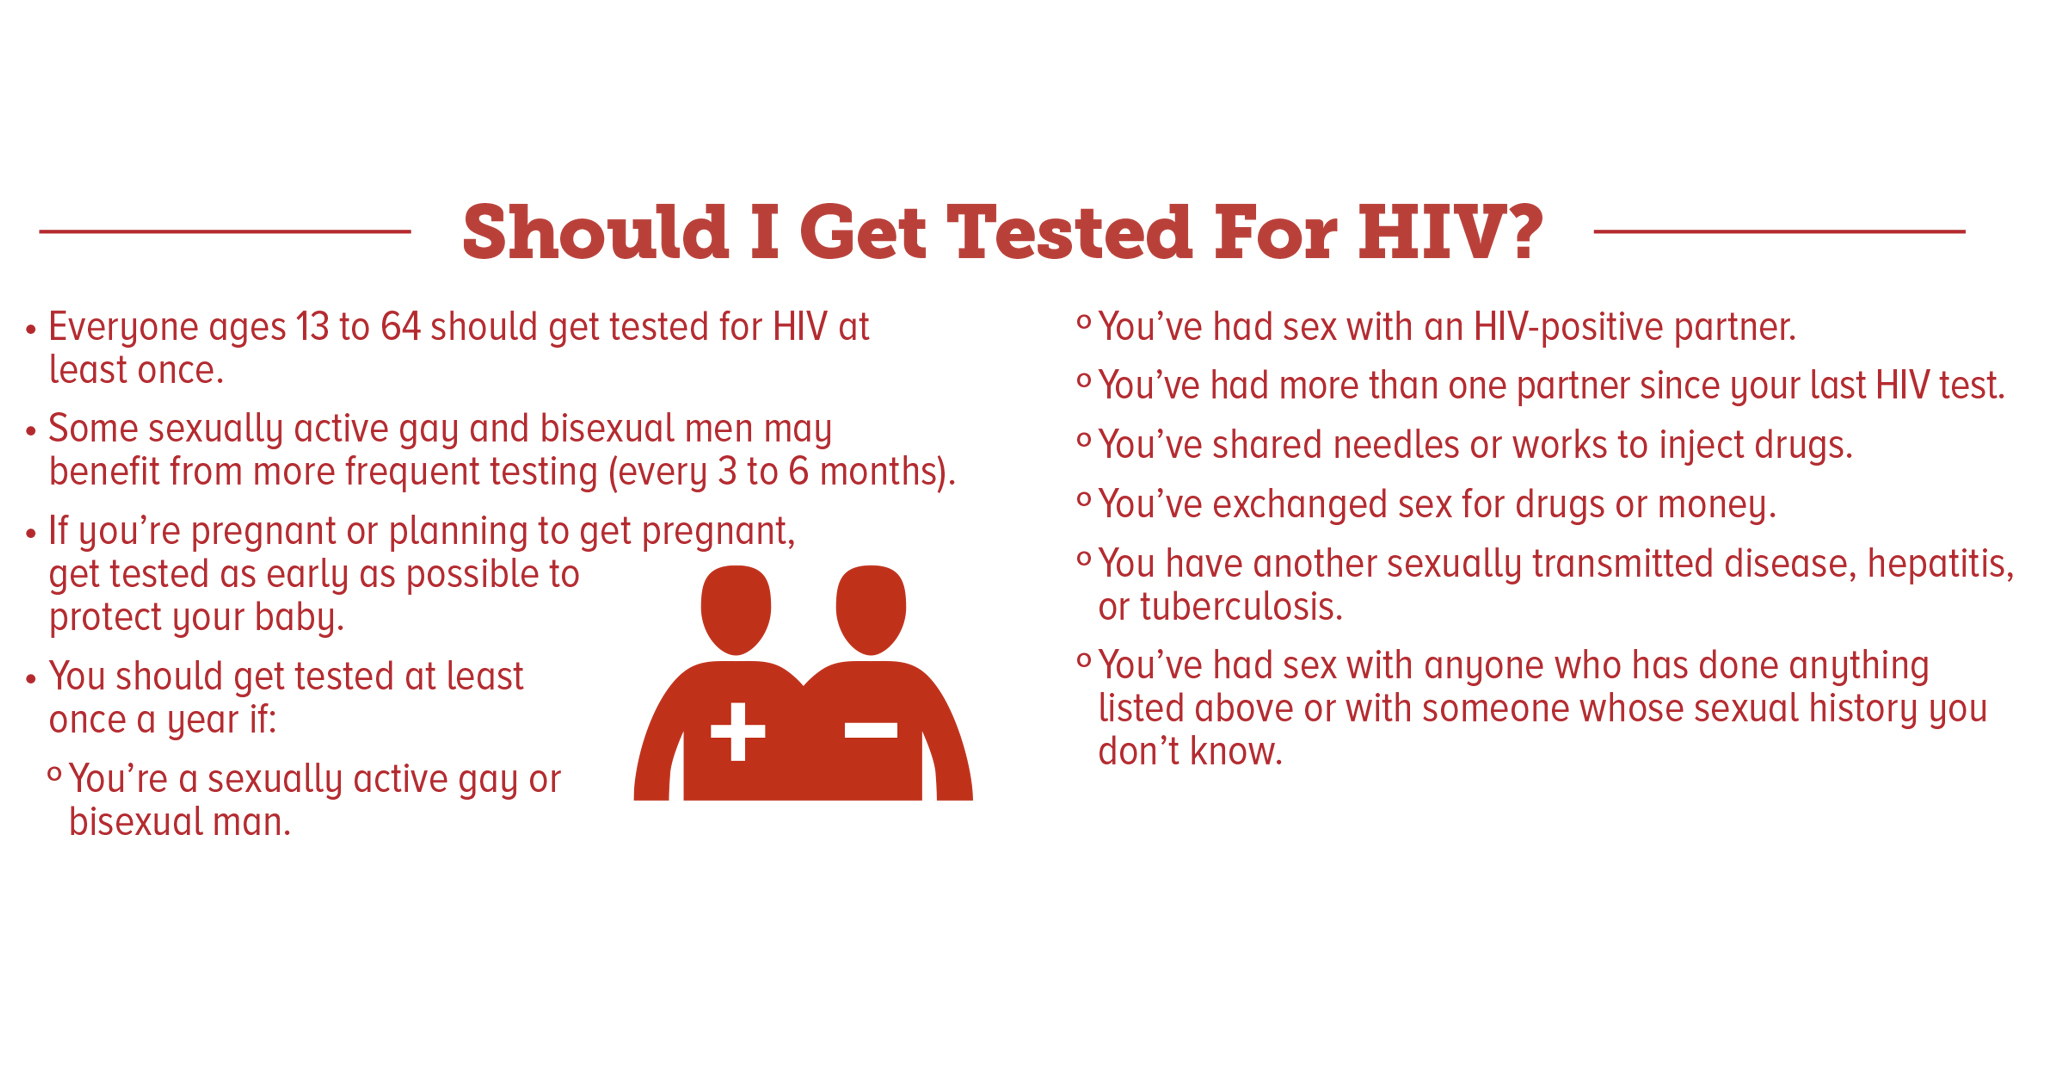 Follow these HIV testing guidelines